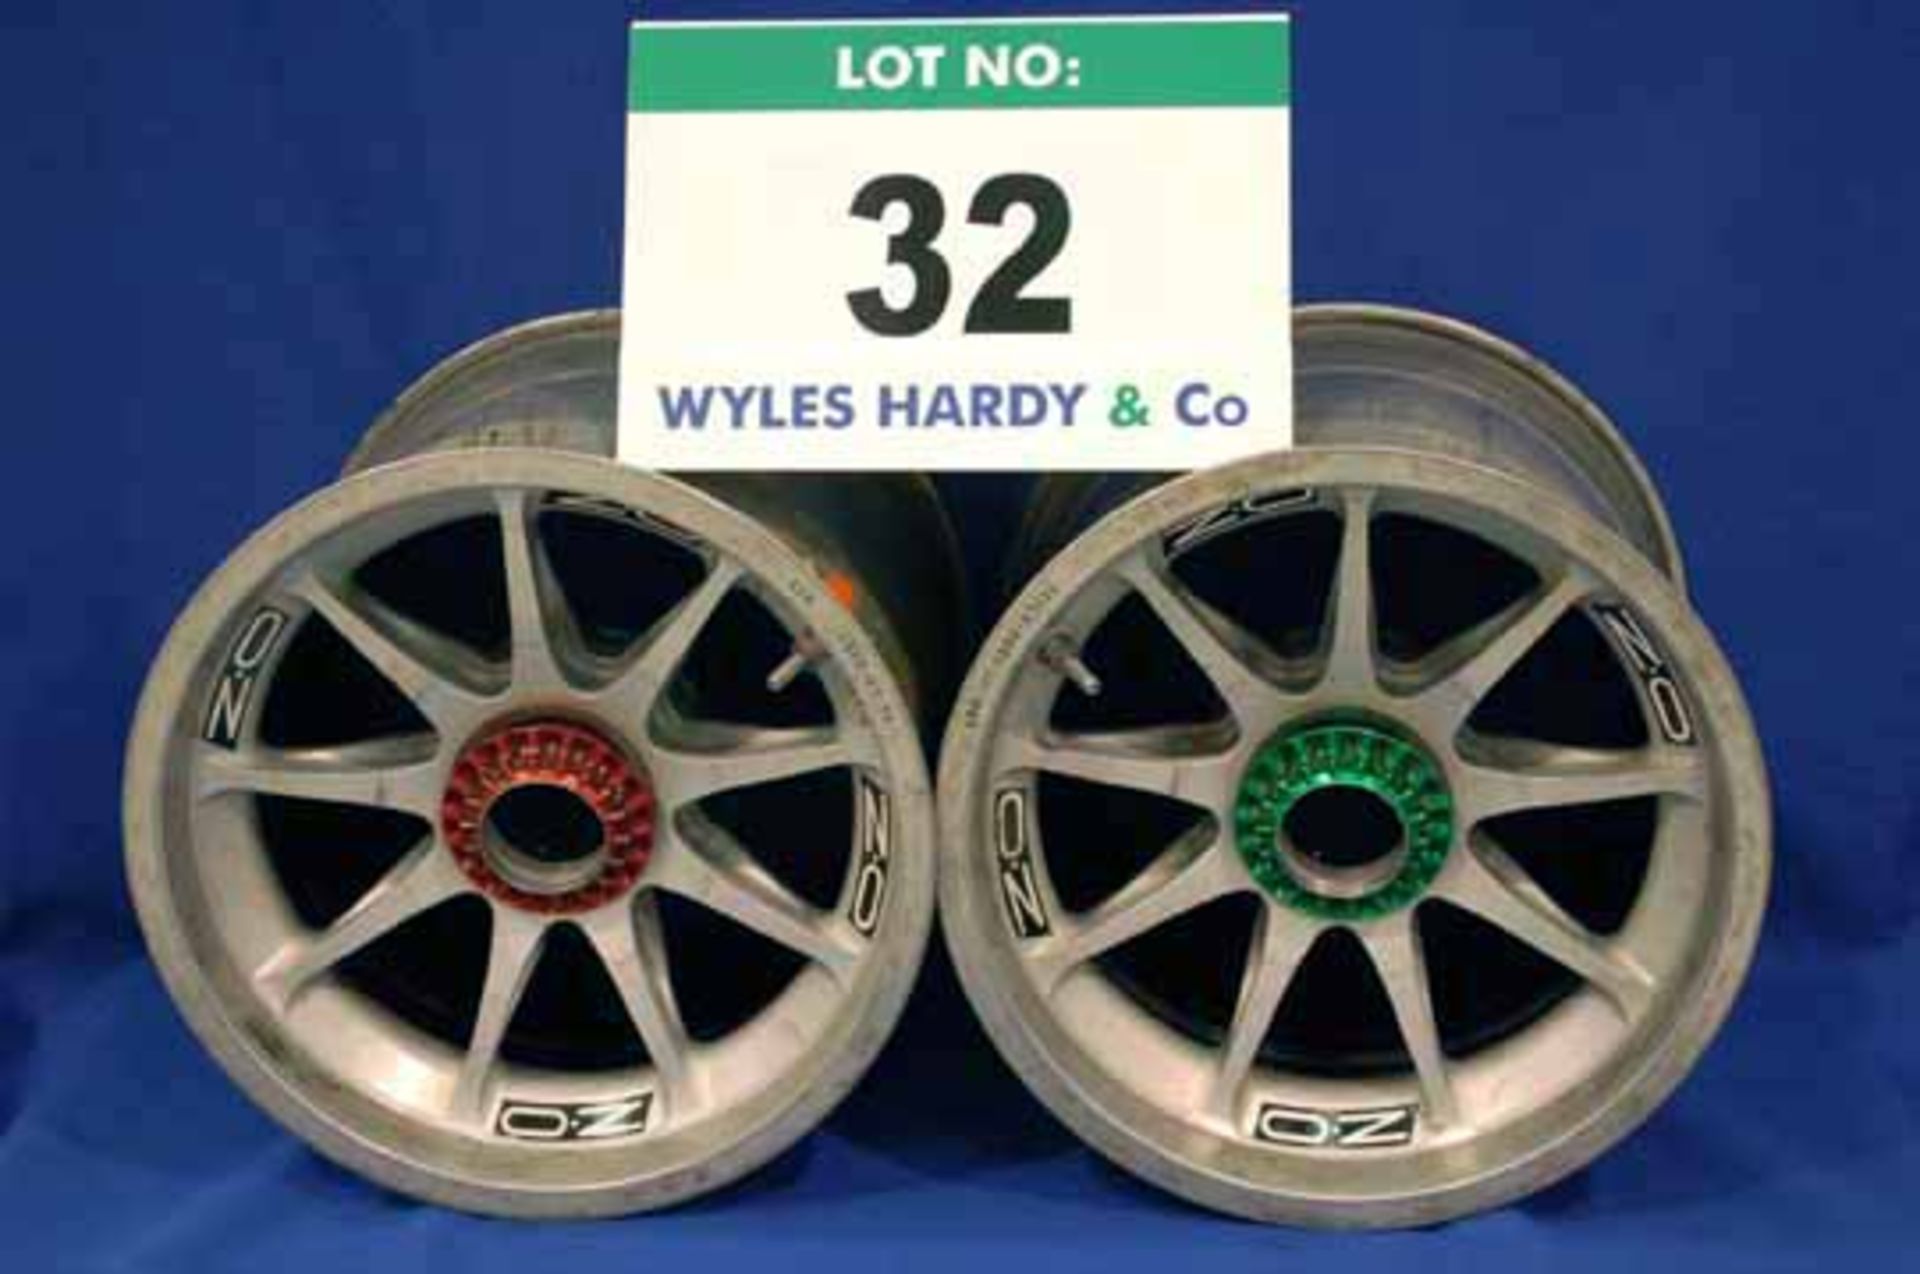 Two OZ 2014 F1 Front Wheel Rims, fitted Captive Wheel Nuts & Tyre Pressure Monitoring